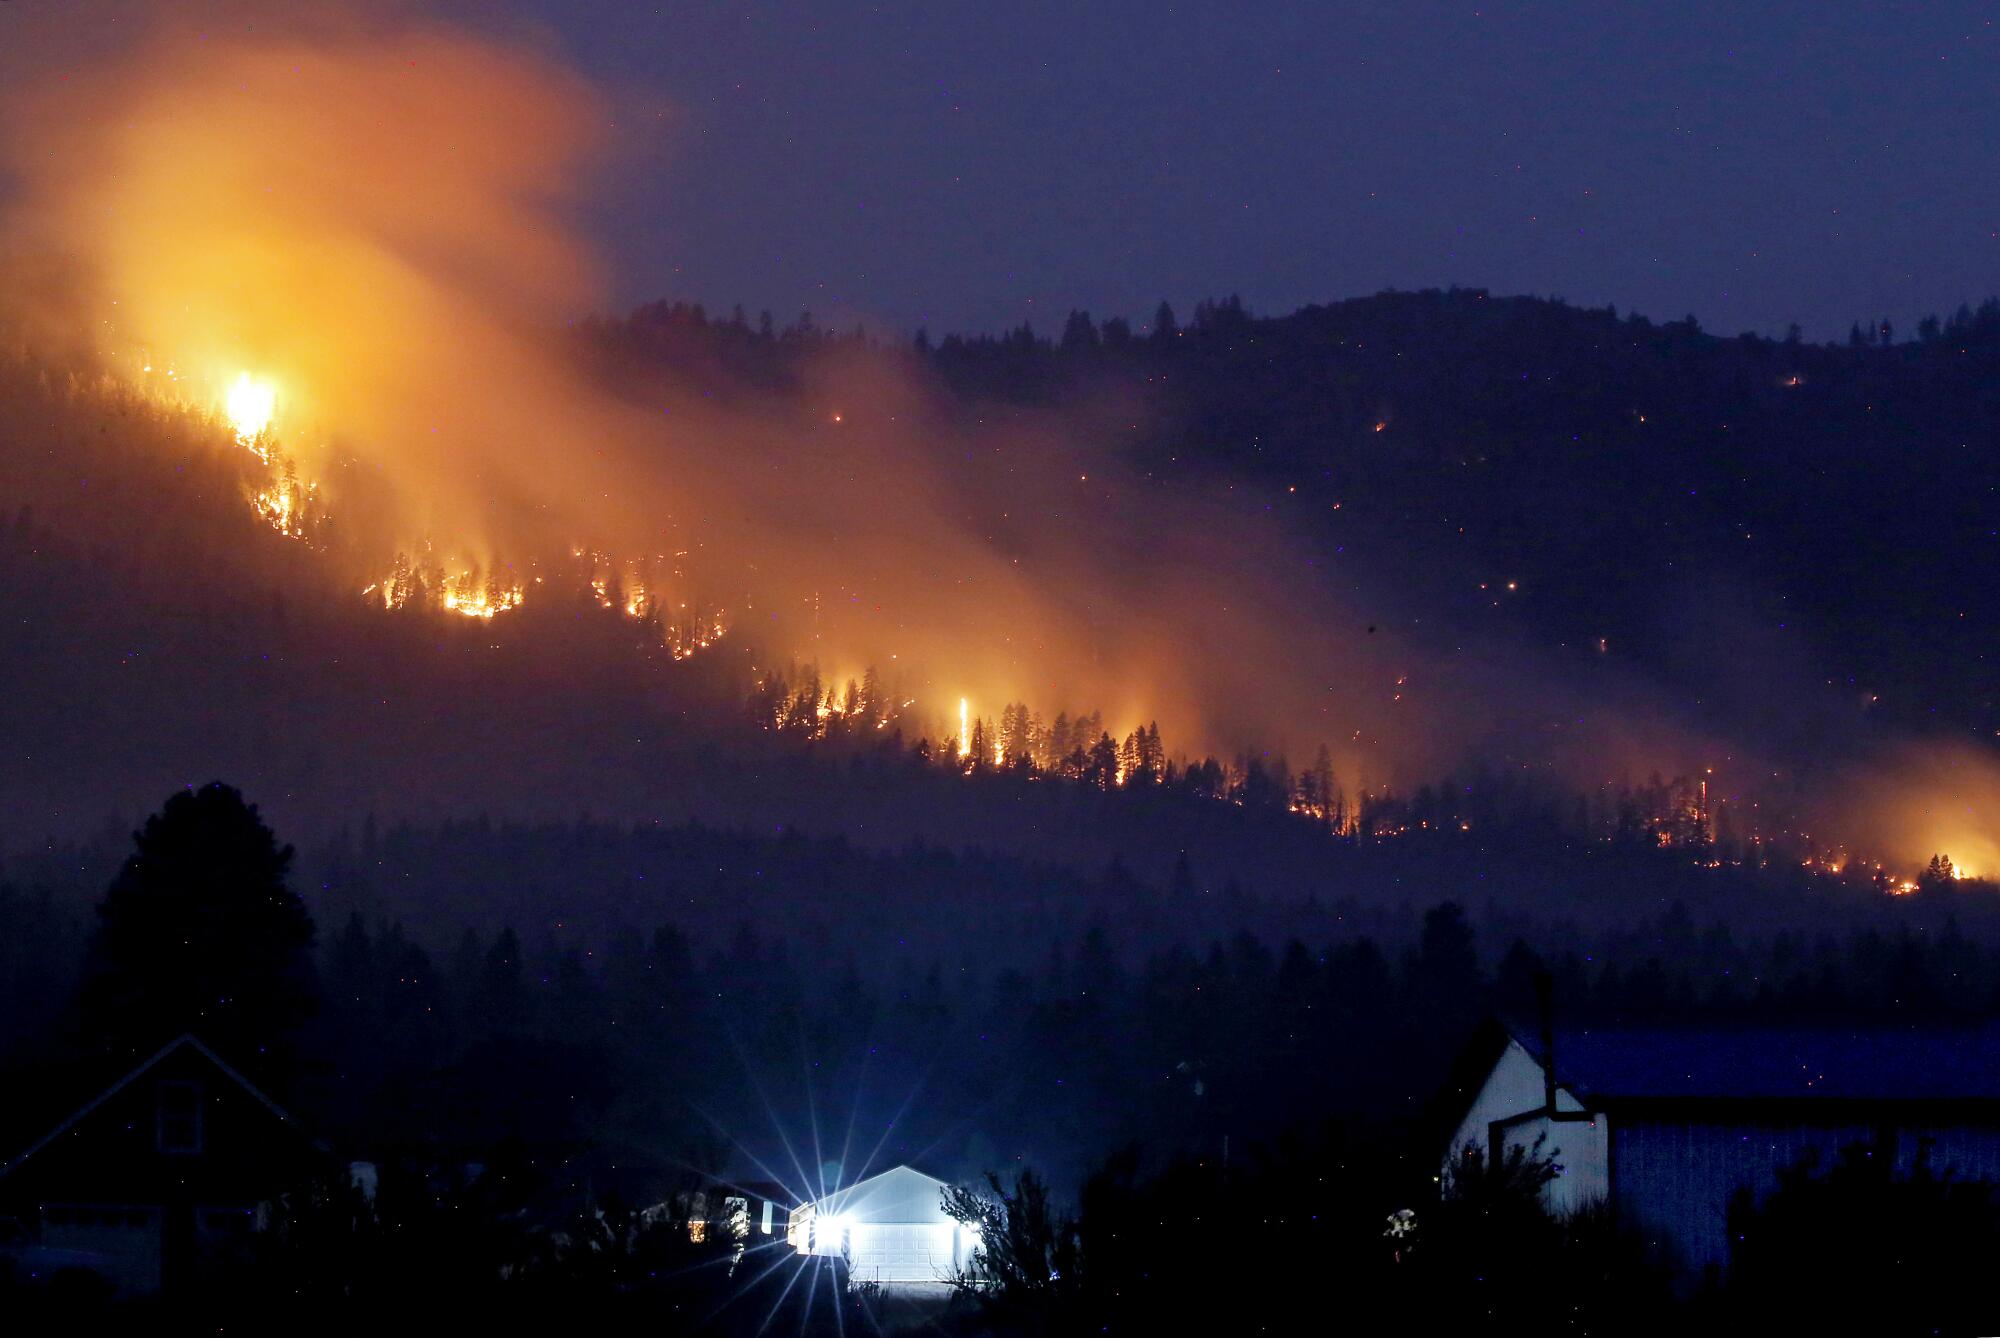 Flames burn through trees on a mountainside at night